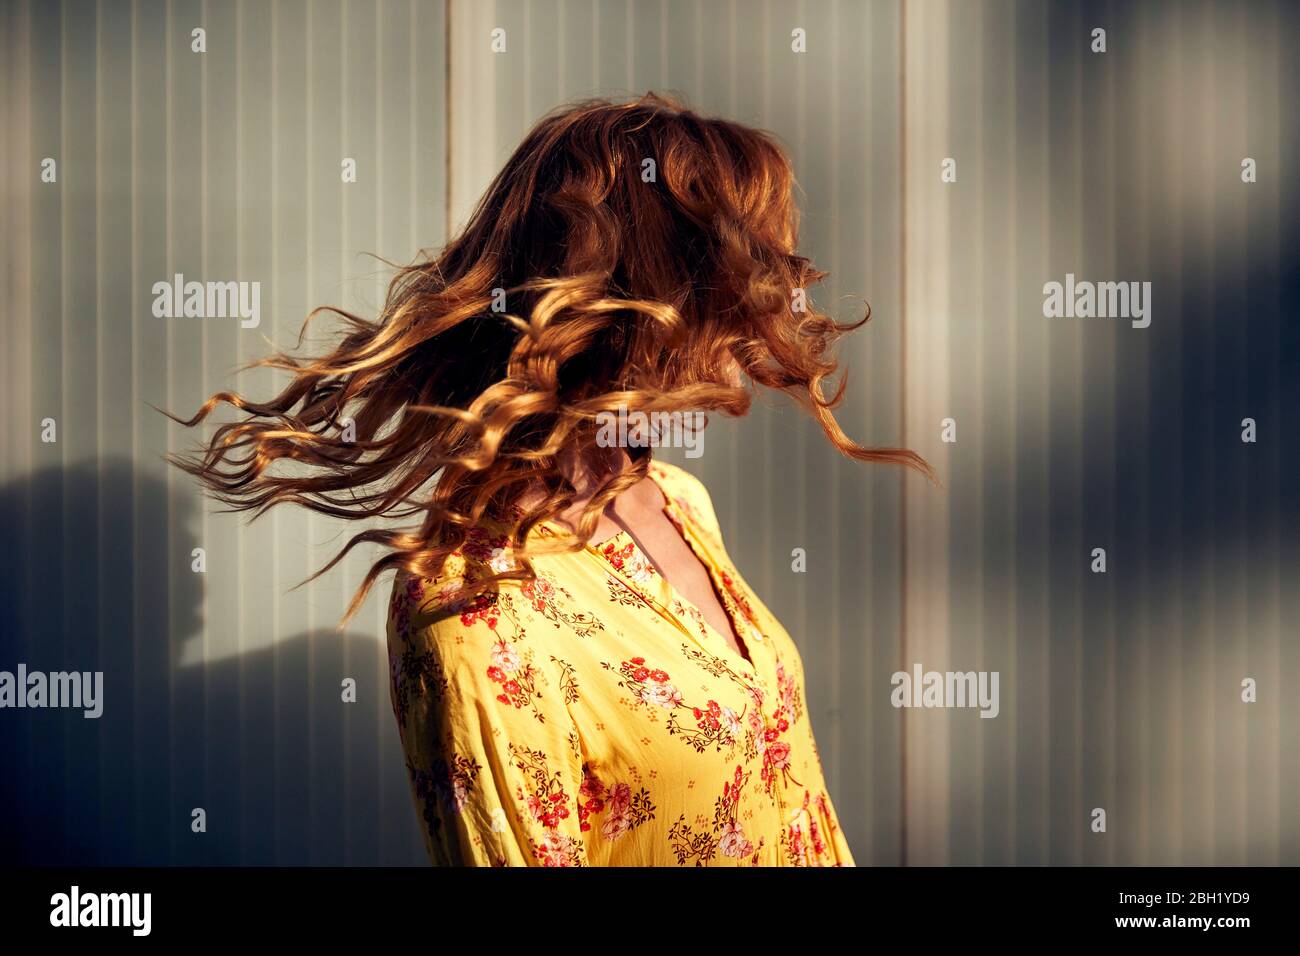 Red-haired woman shaking her hair Stock Photo